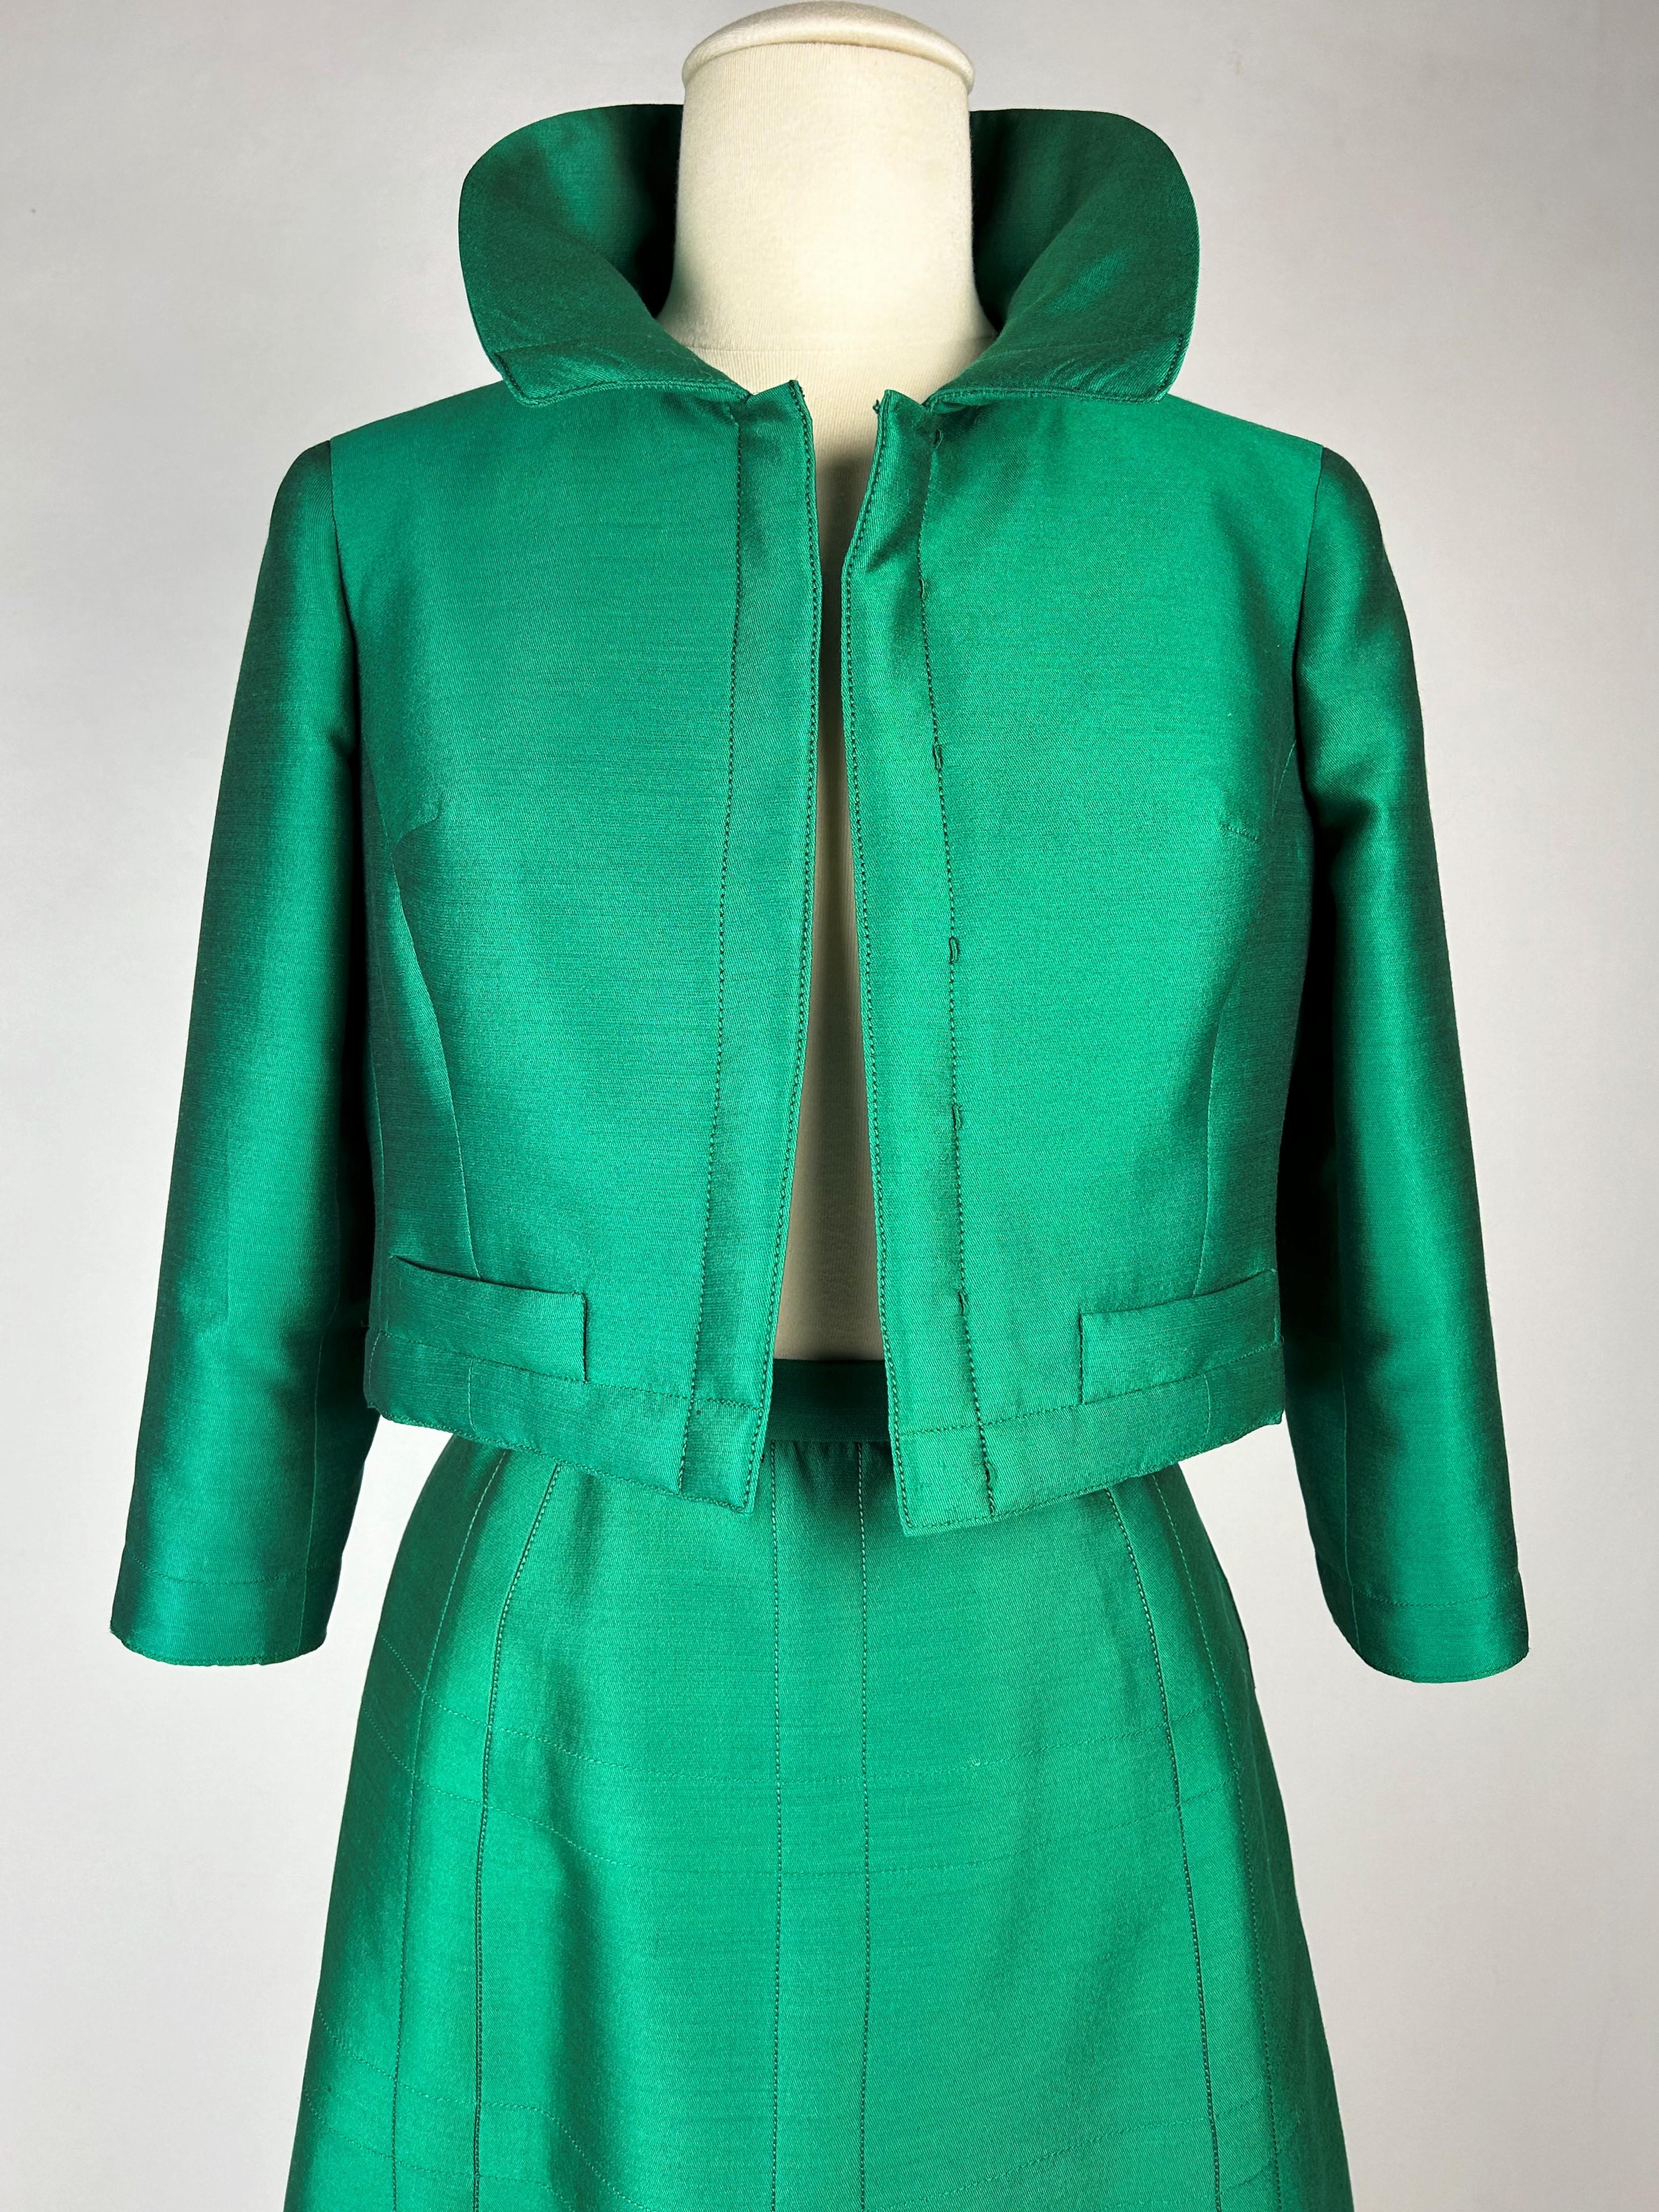 An Emerald Gazar Demi-Couture Skirt Suit by Louis Féraud Circa 1968-1972 For Sale 13